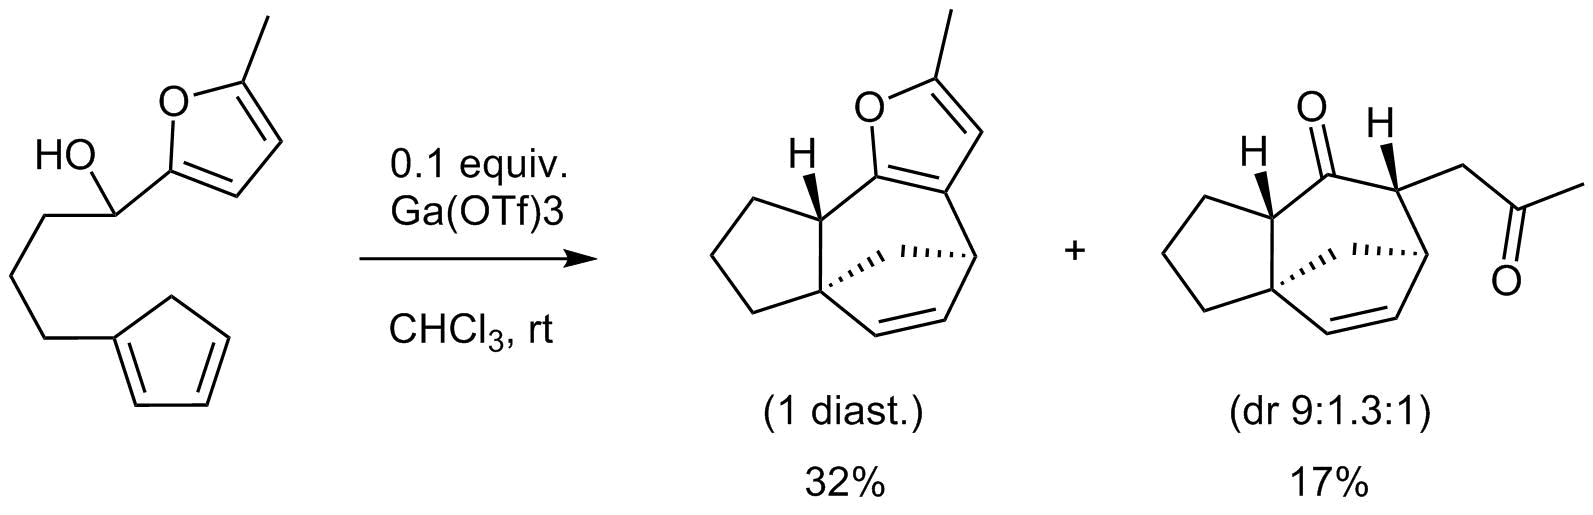 A Rapid and Stereocontrolled Synthesis of the Zizaane Ring System by Using an Intramolecular (4+3) Cycloaddition Reaction